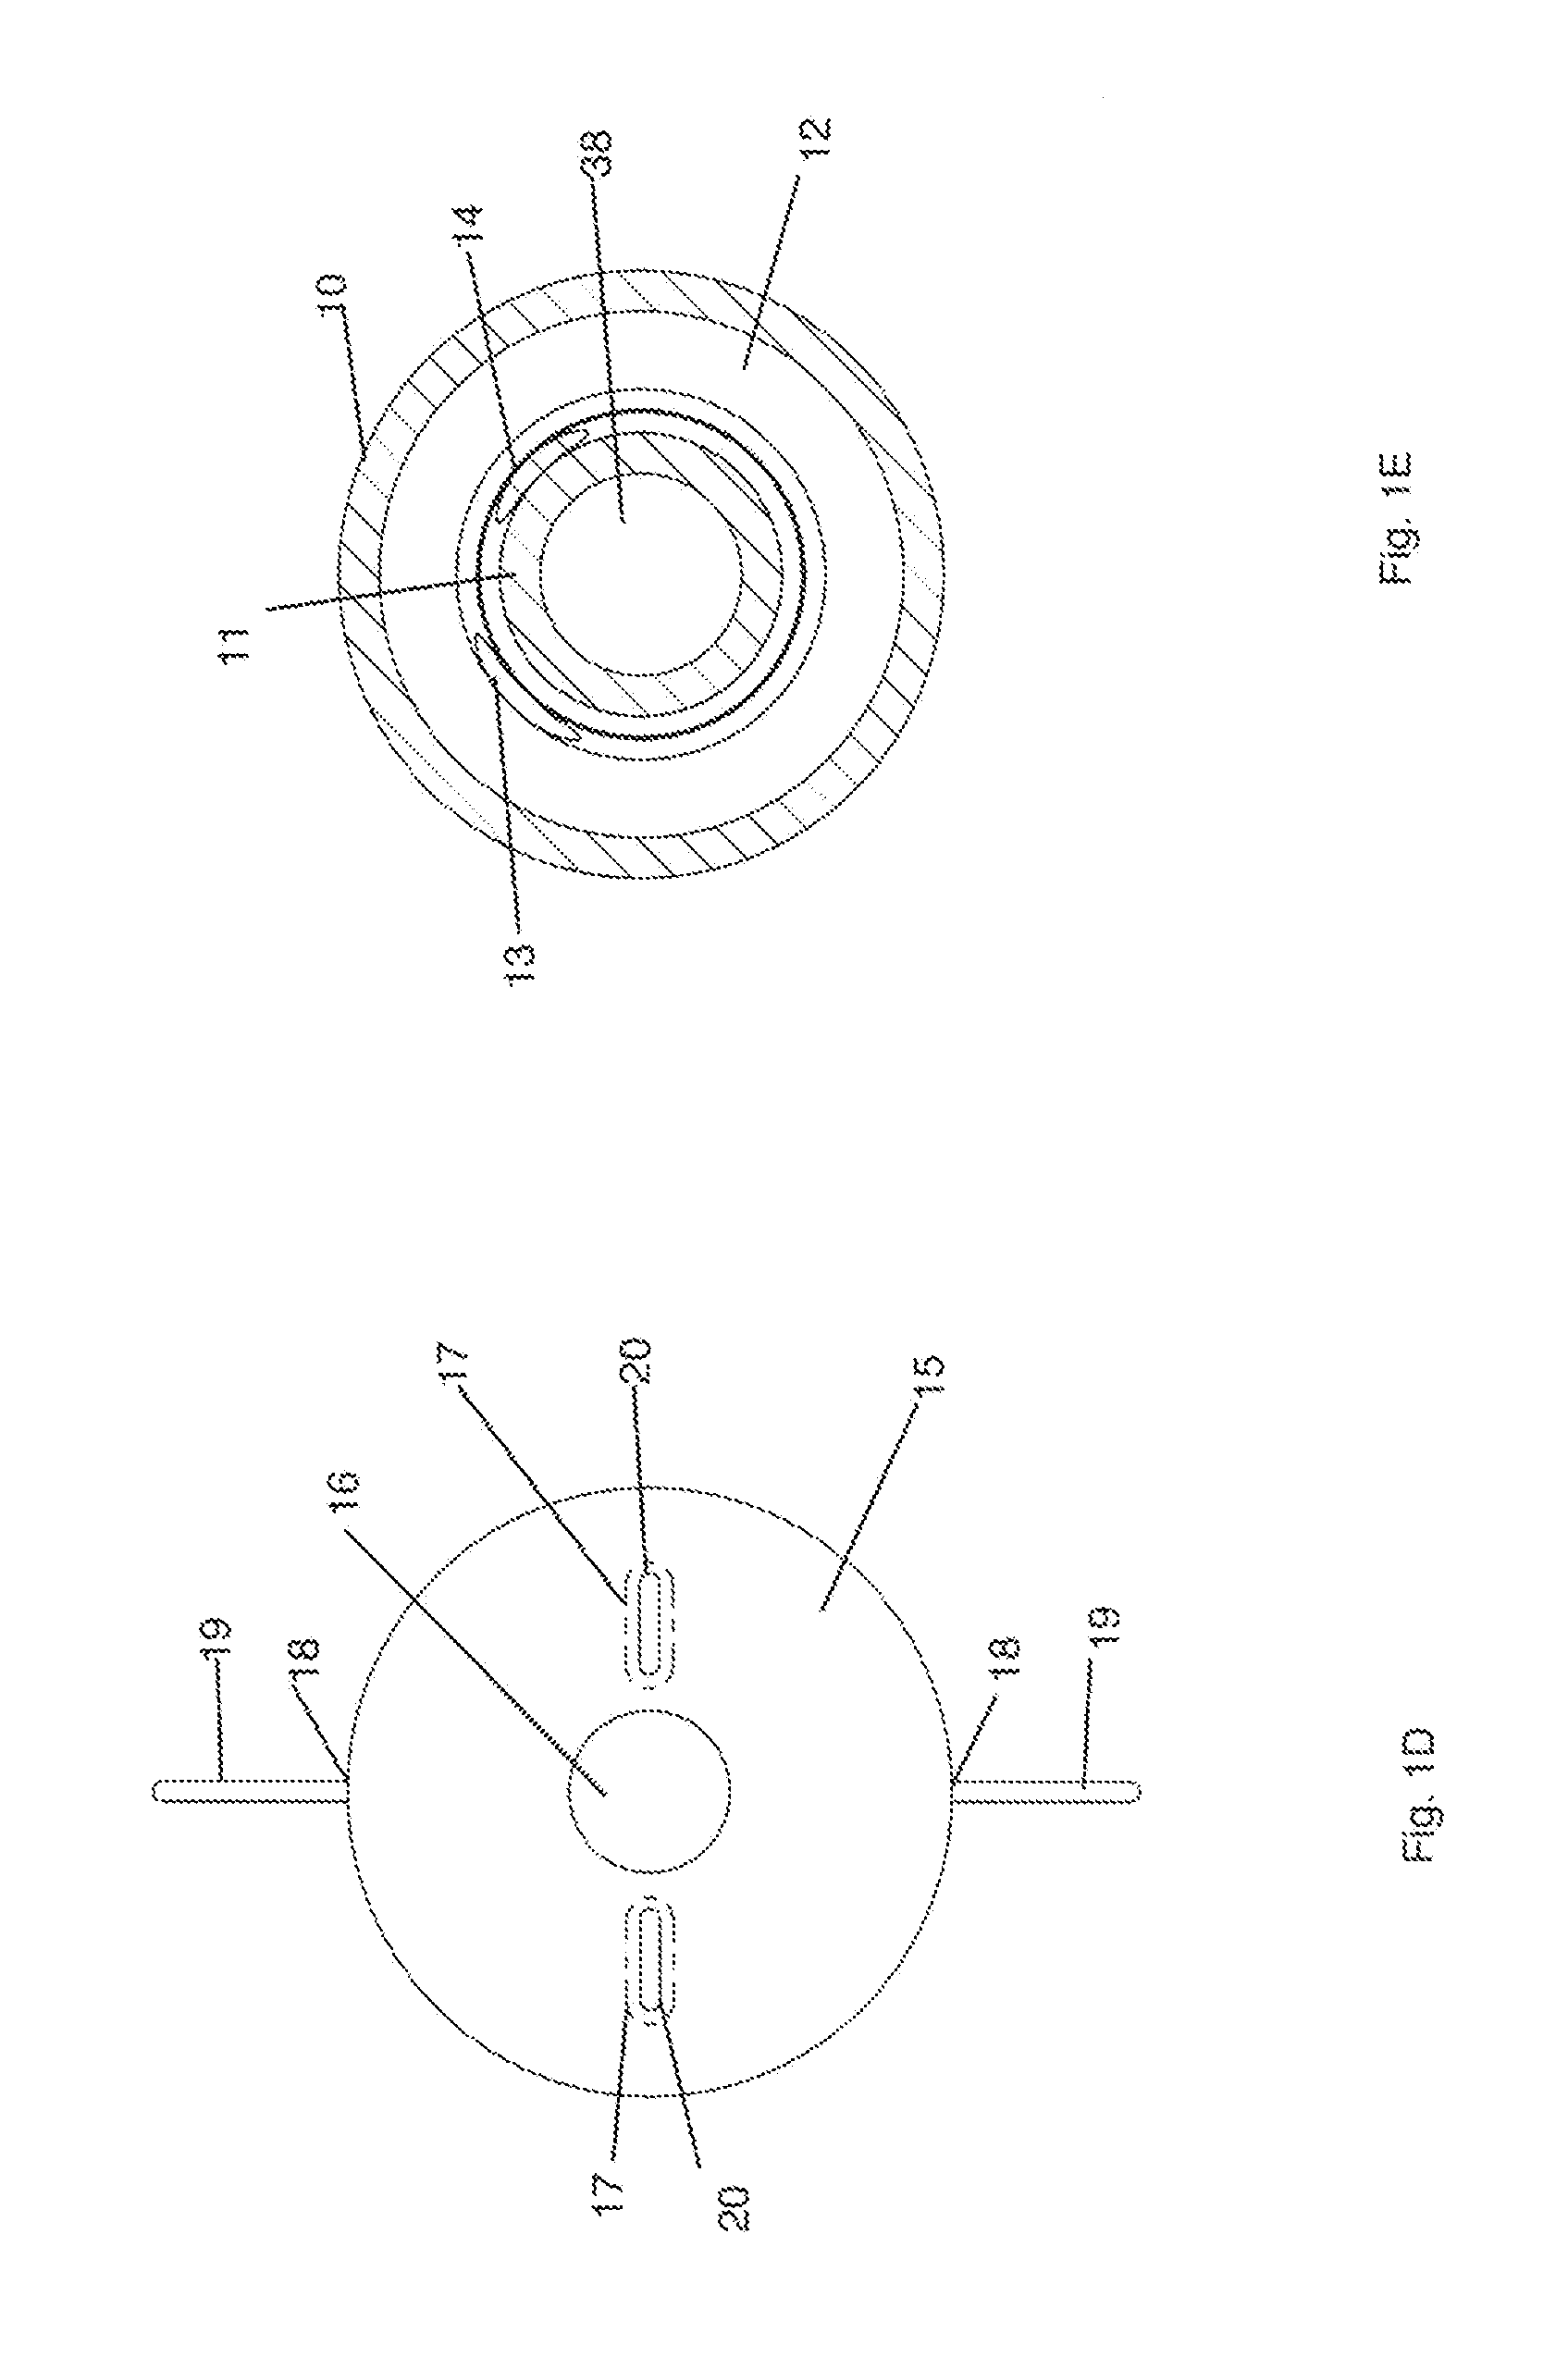 Device and Method for Treating a Chronic Total Occlusion